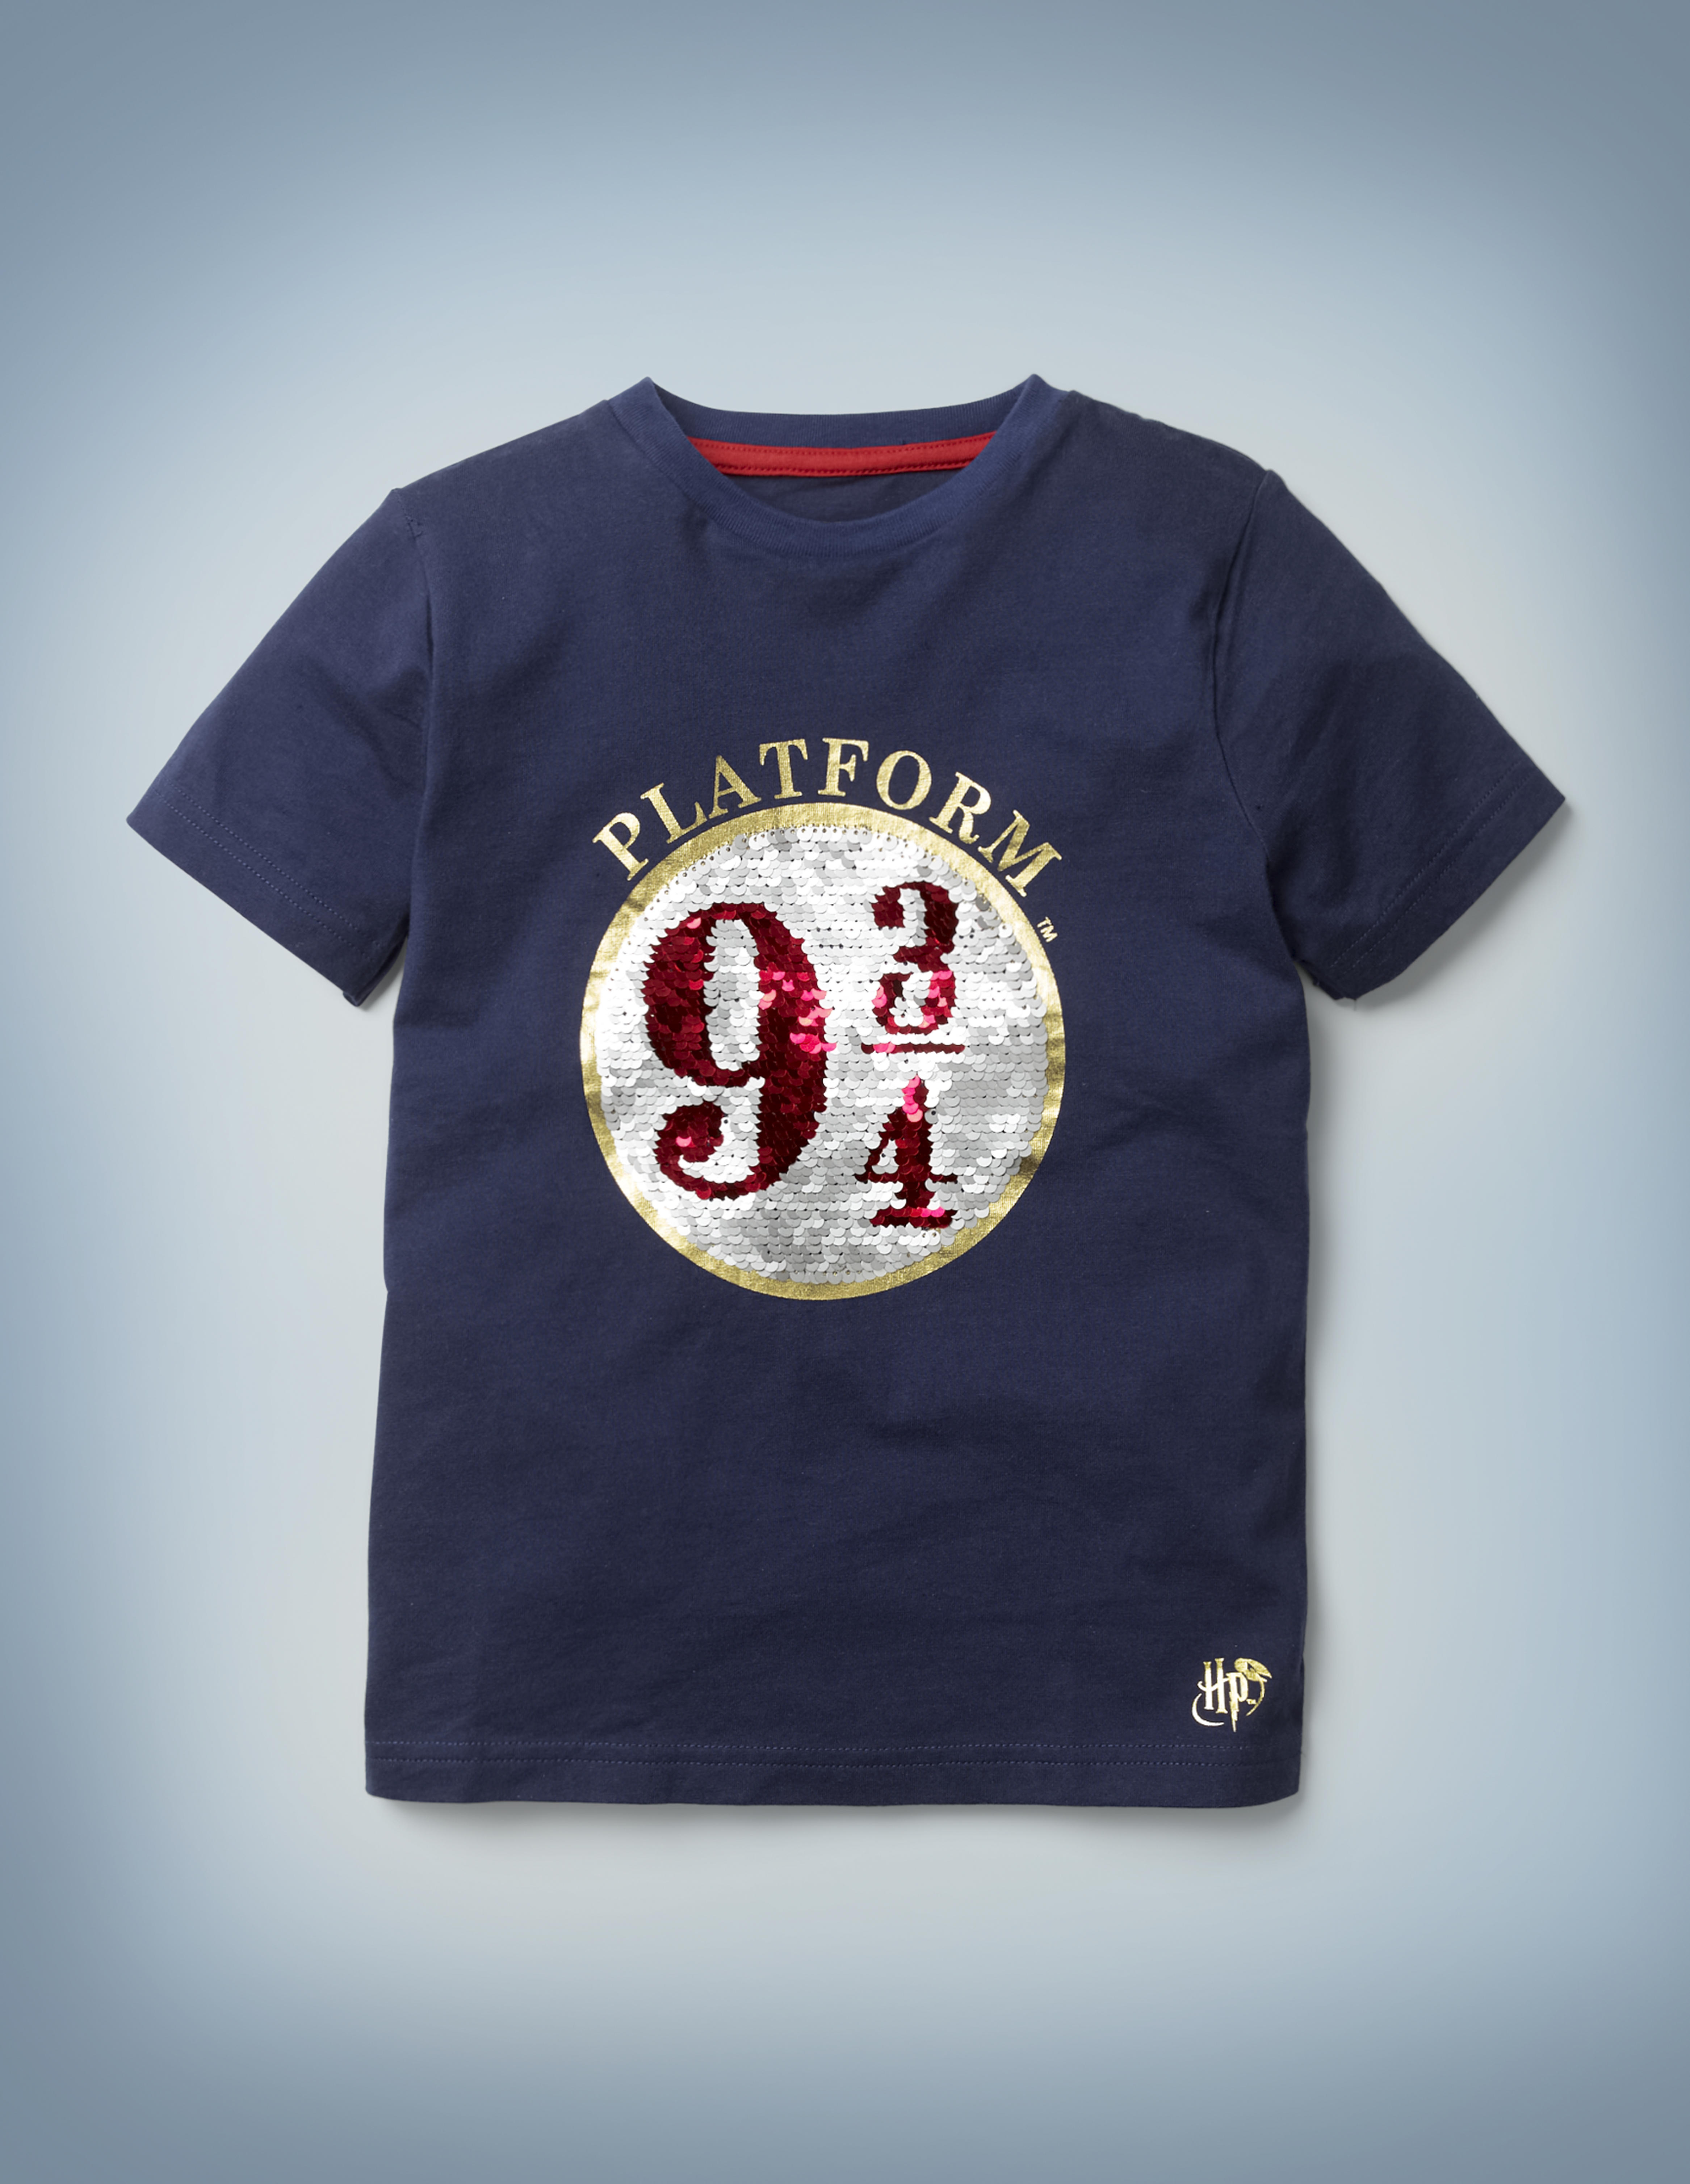 The Mini Boden Platform 9 ¾  Sequin T-shirt in blue features an eye-catching graphic of the circular 9 ¾ sign in silver and red sequins. It retails between £20 and £22.